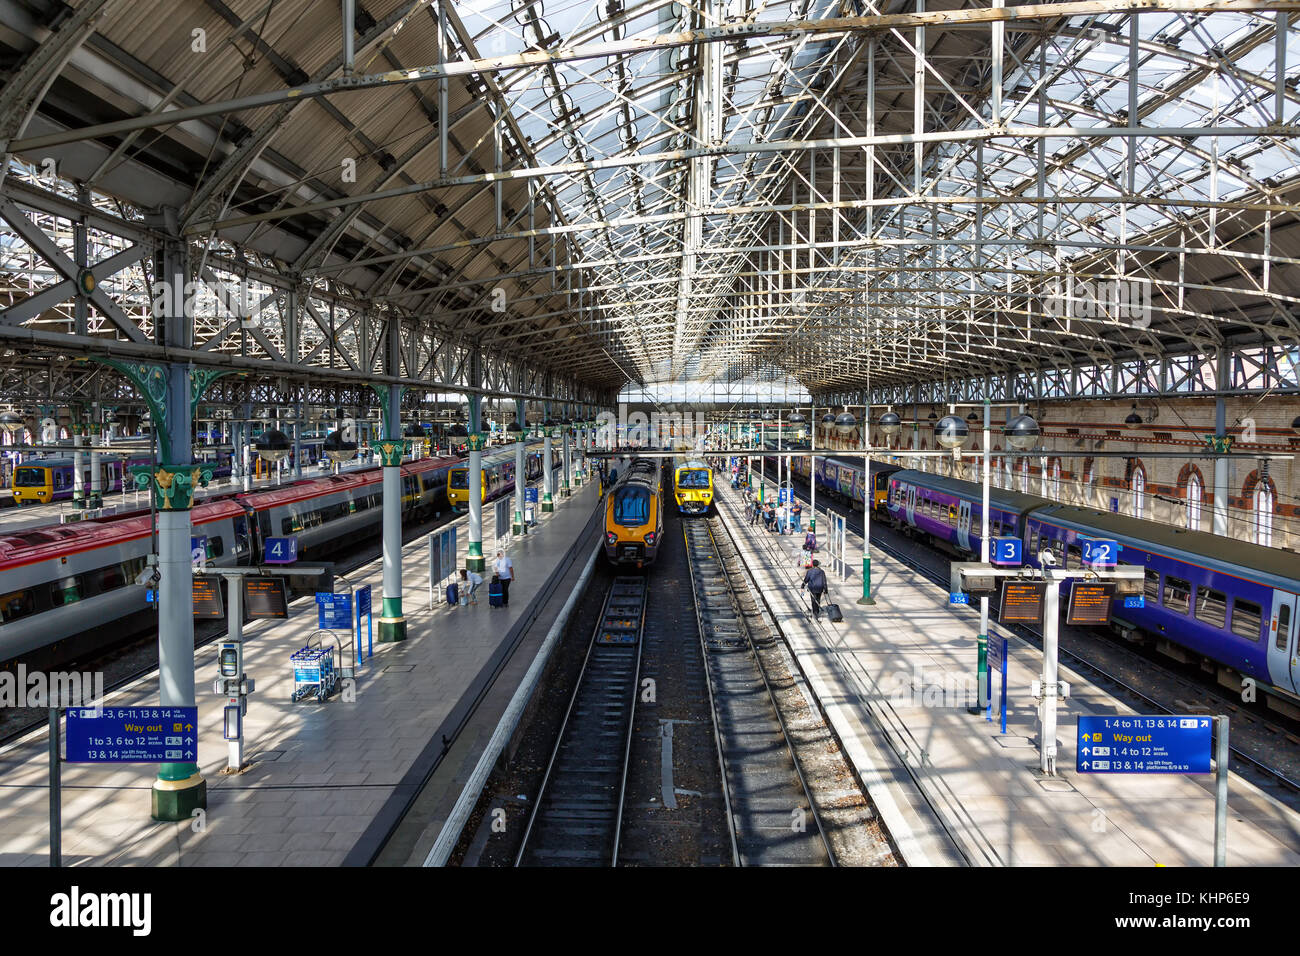 Manchester, Great Britain - August 15, 2017: Manchester Piccadilly Station in Great Britain Stock Photo